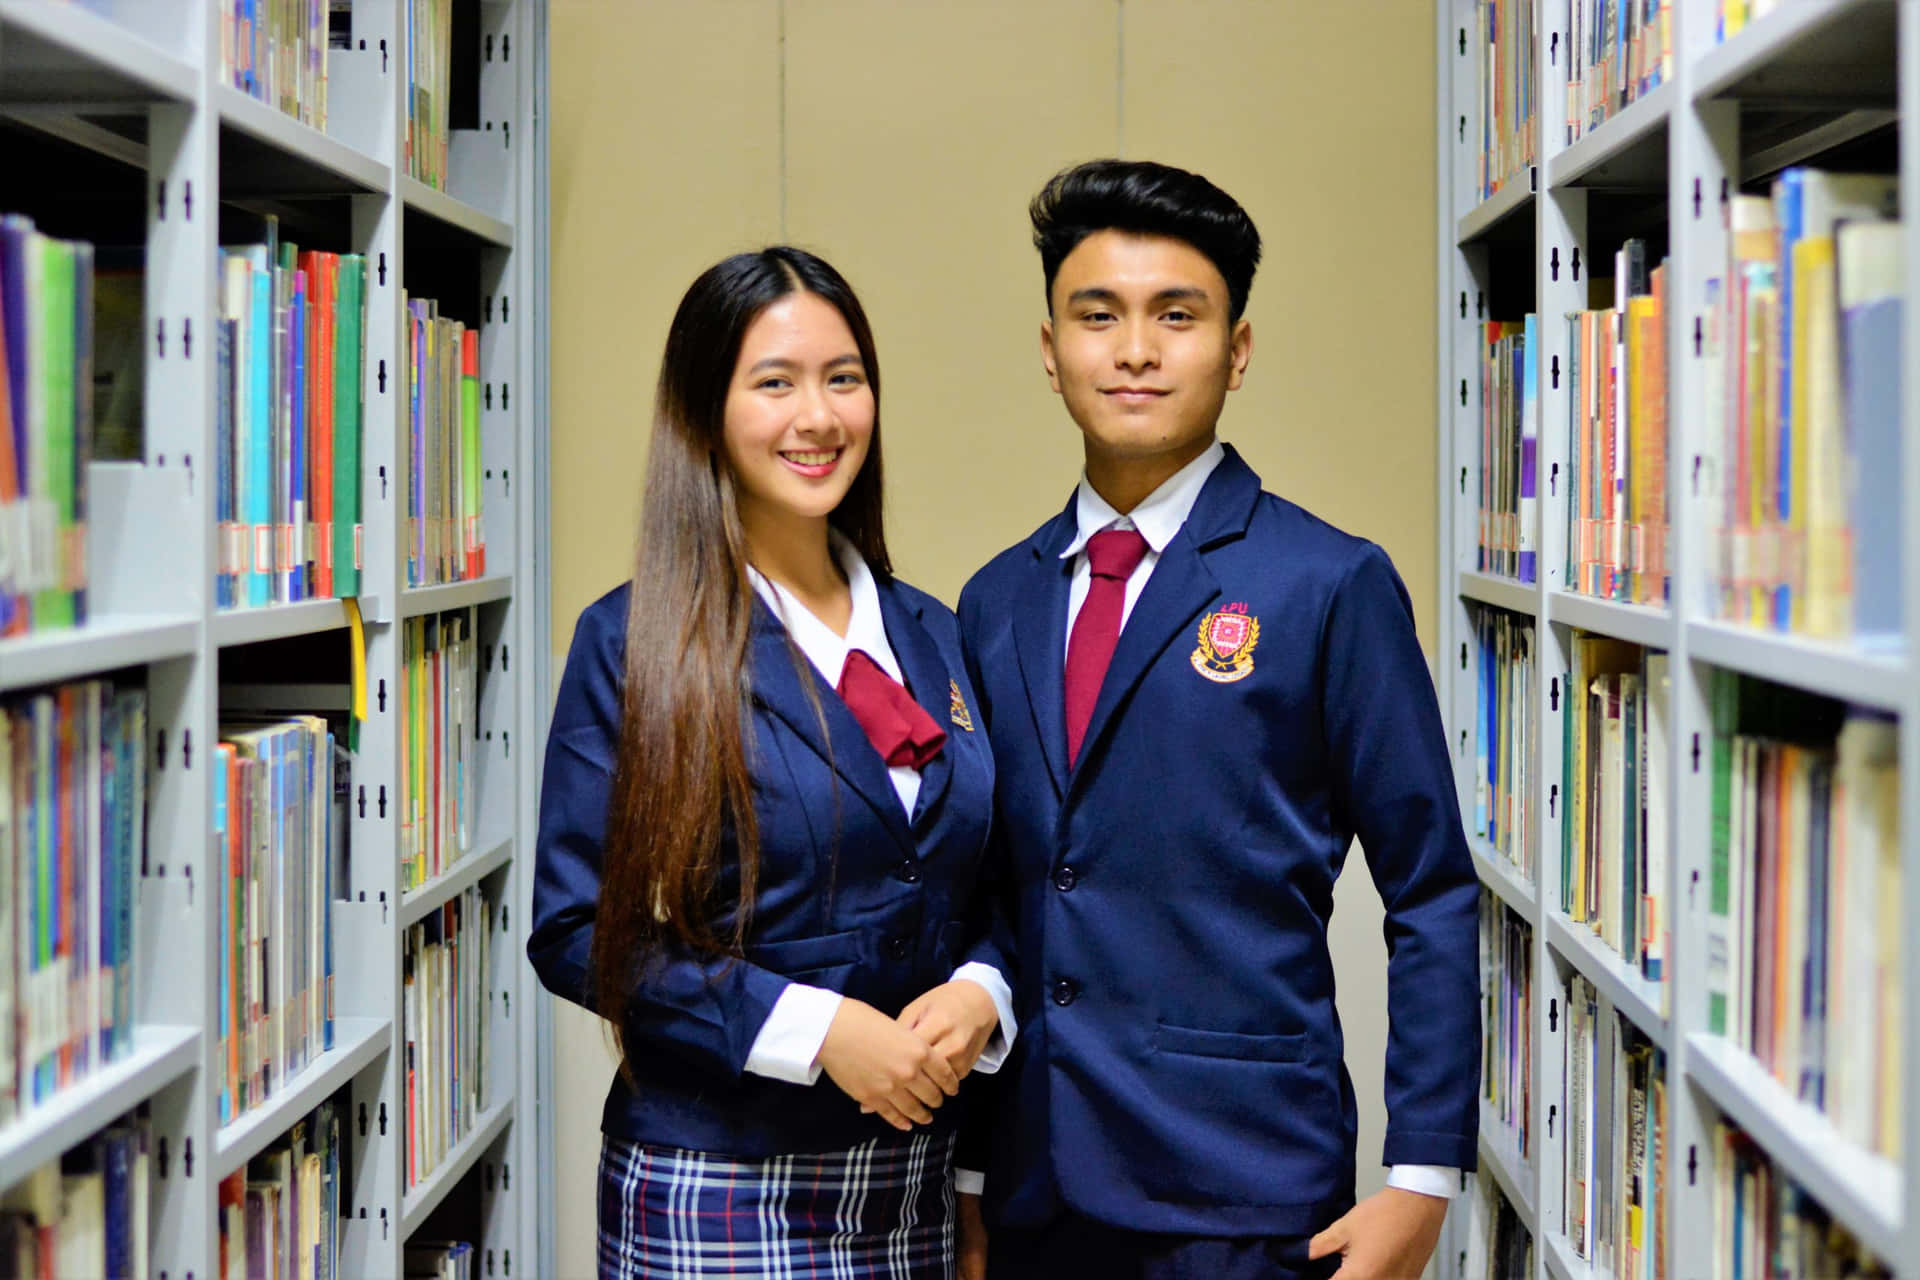 Two Young People In School Uniforms Standing In A Library